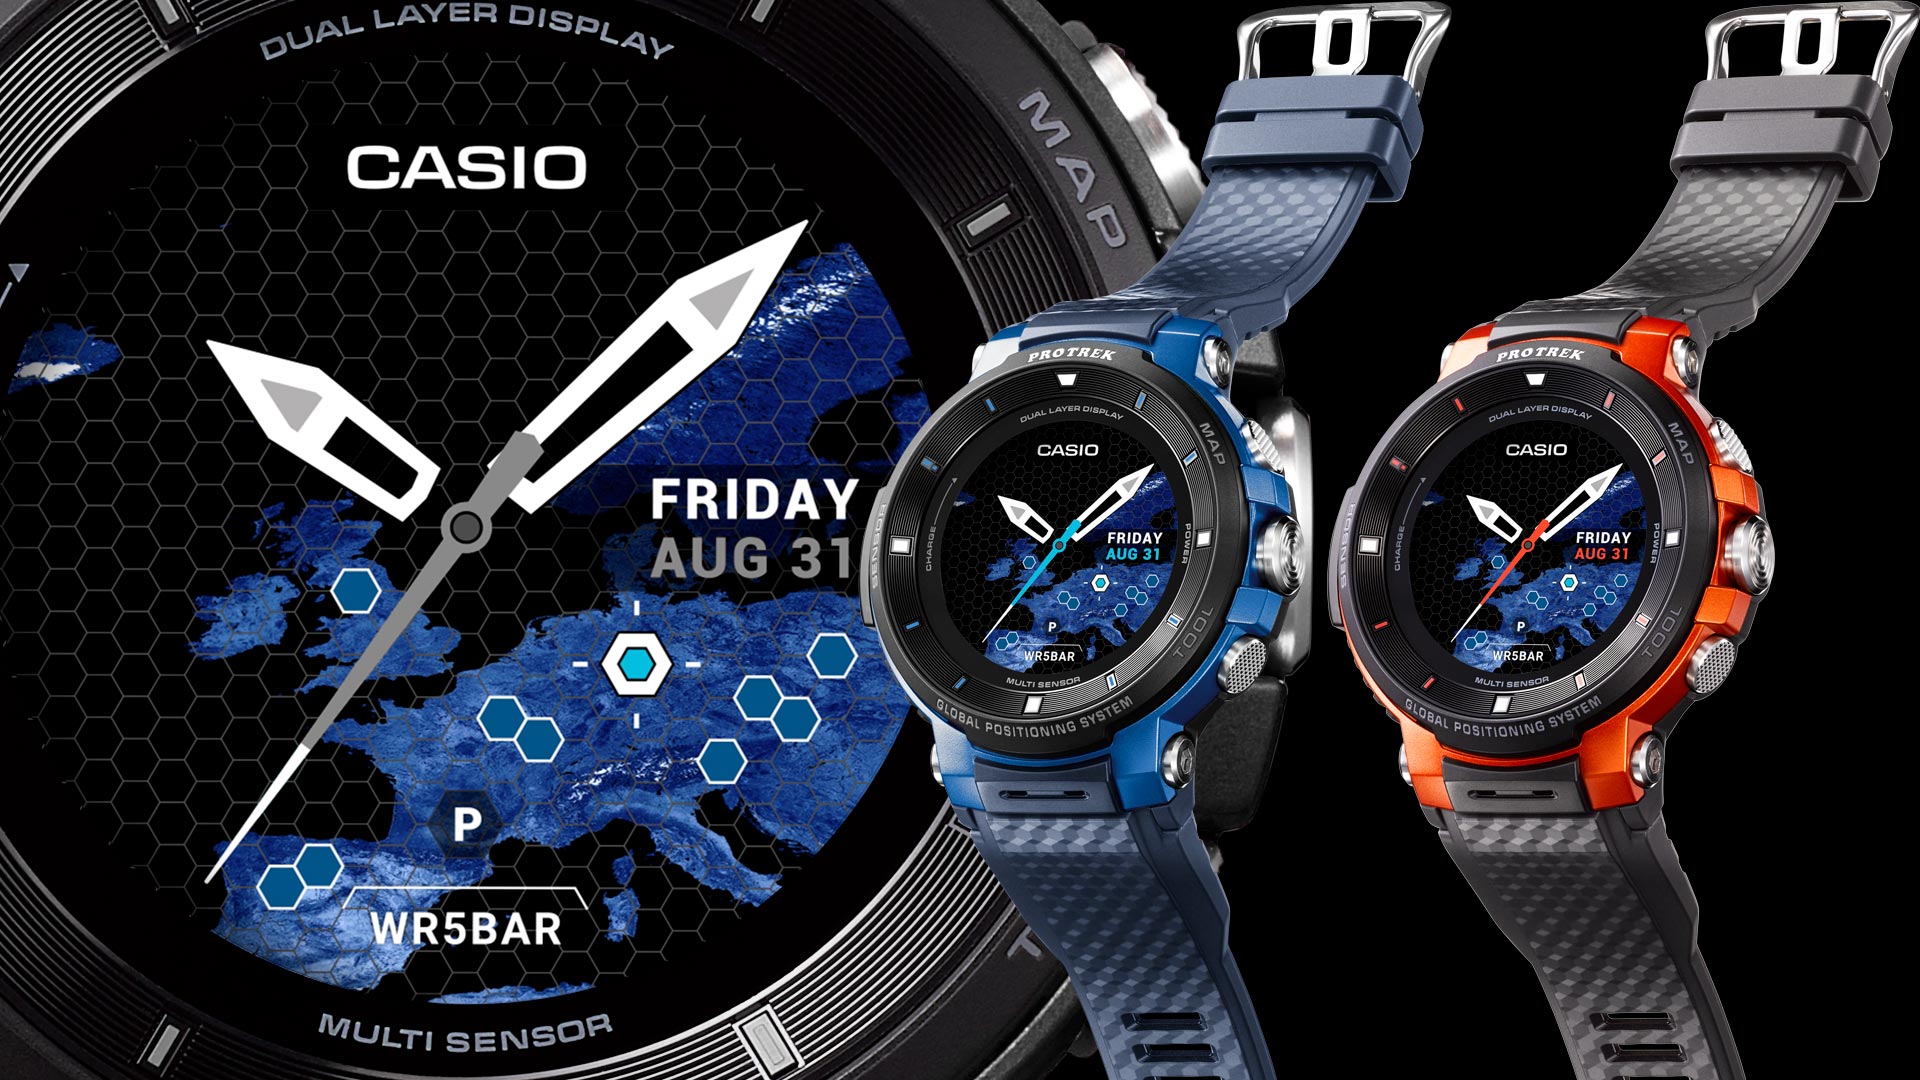 Casio Protrek Smart WSD-F30 Watch Now Has More Wearable Size & Improved Battery Life